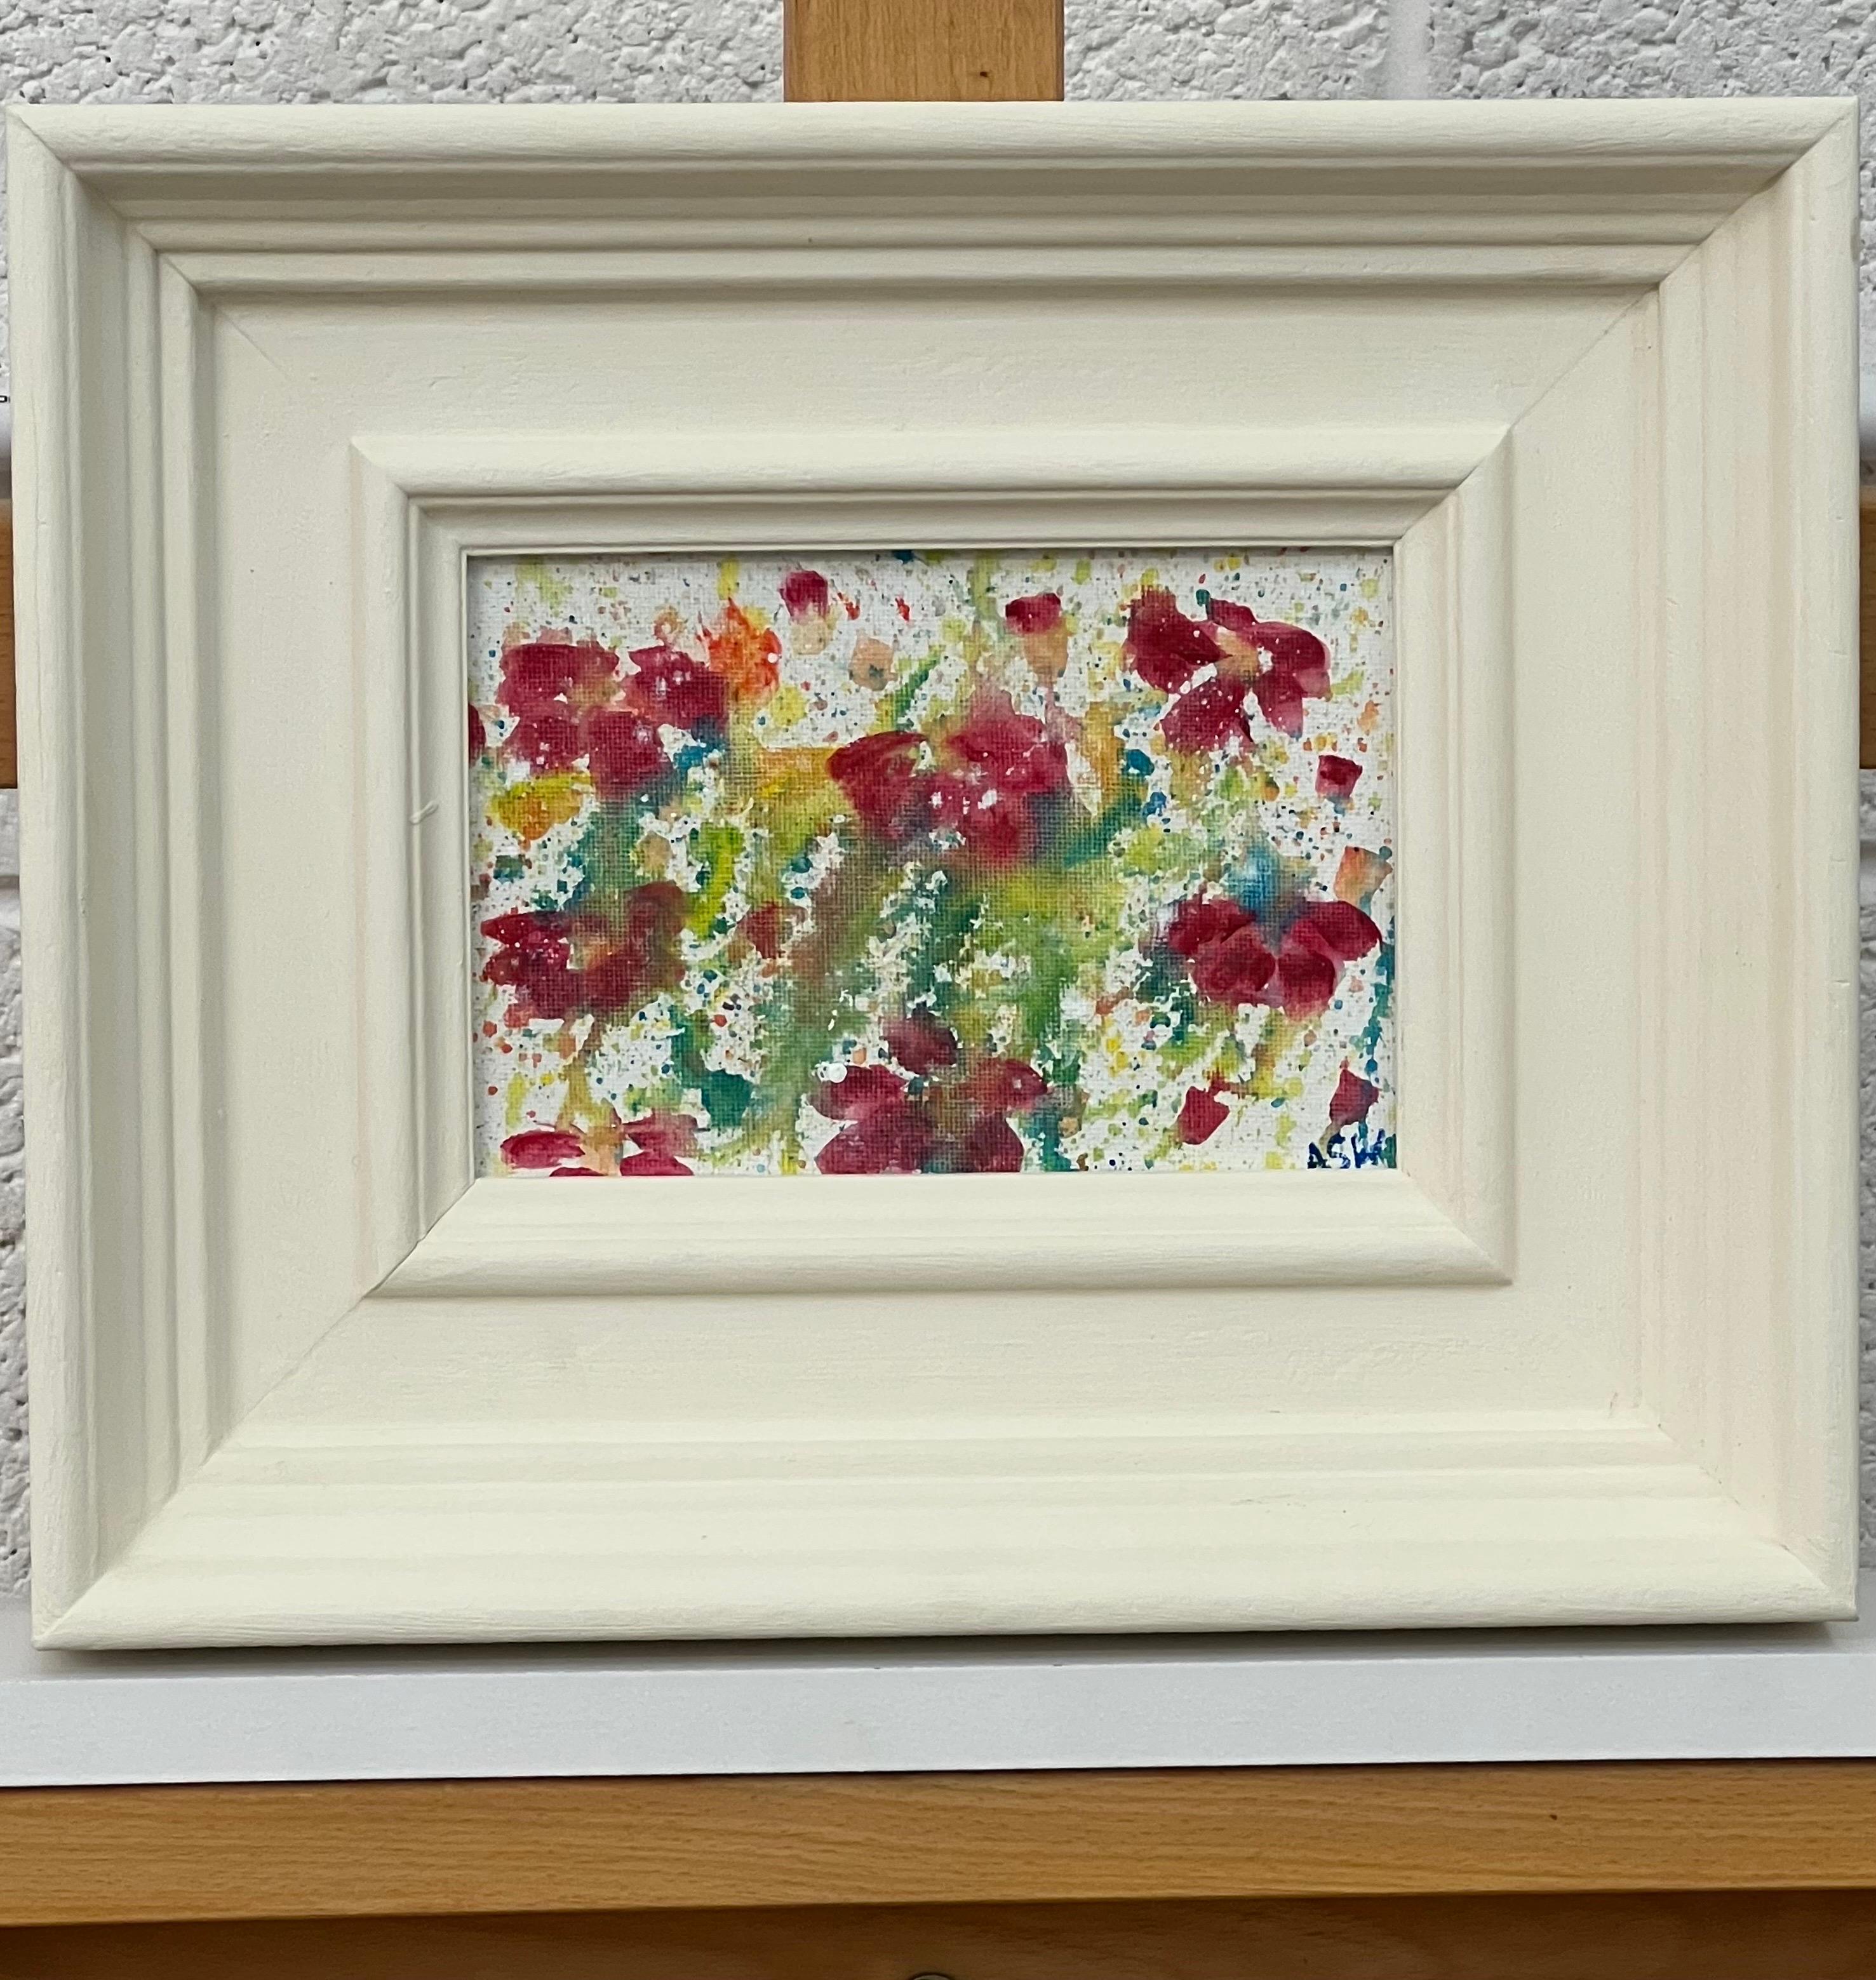 Miniature Abstract Flower Study on White Canvas by Contemporary British Artist, Angela Wakefield

Art measures 7 x 5 inches
Frame measures 12 x 10 inches 

Angela Wakefield has twice been on the front cover of ‘Art of England’ and featured in